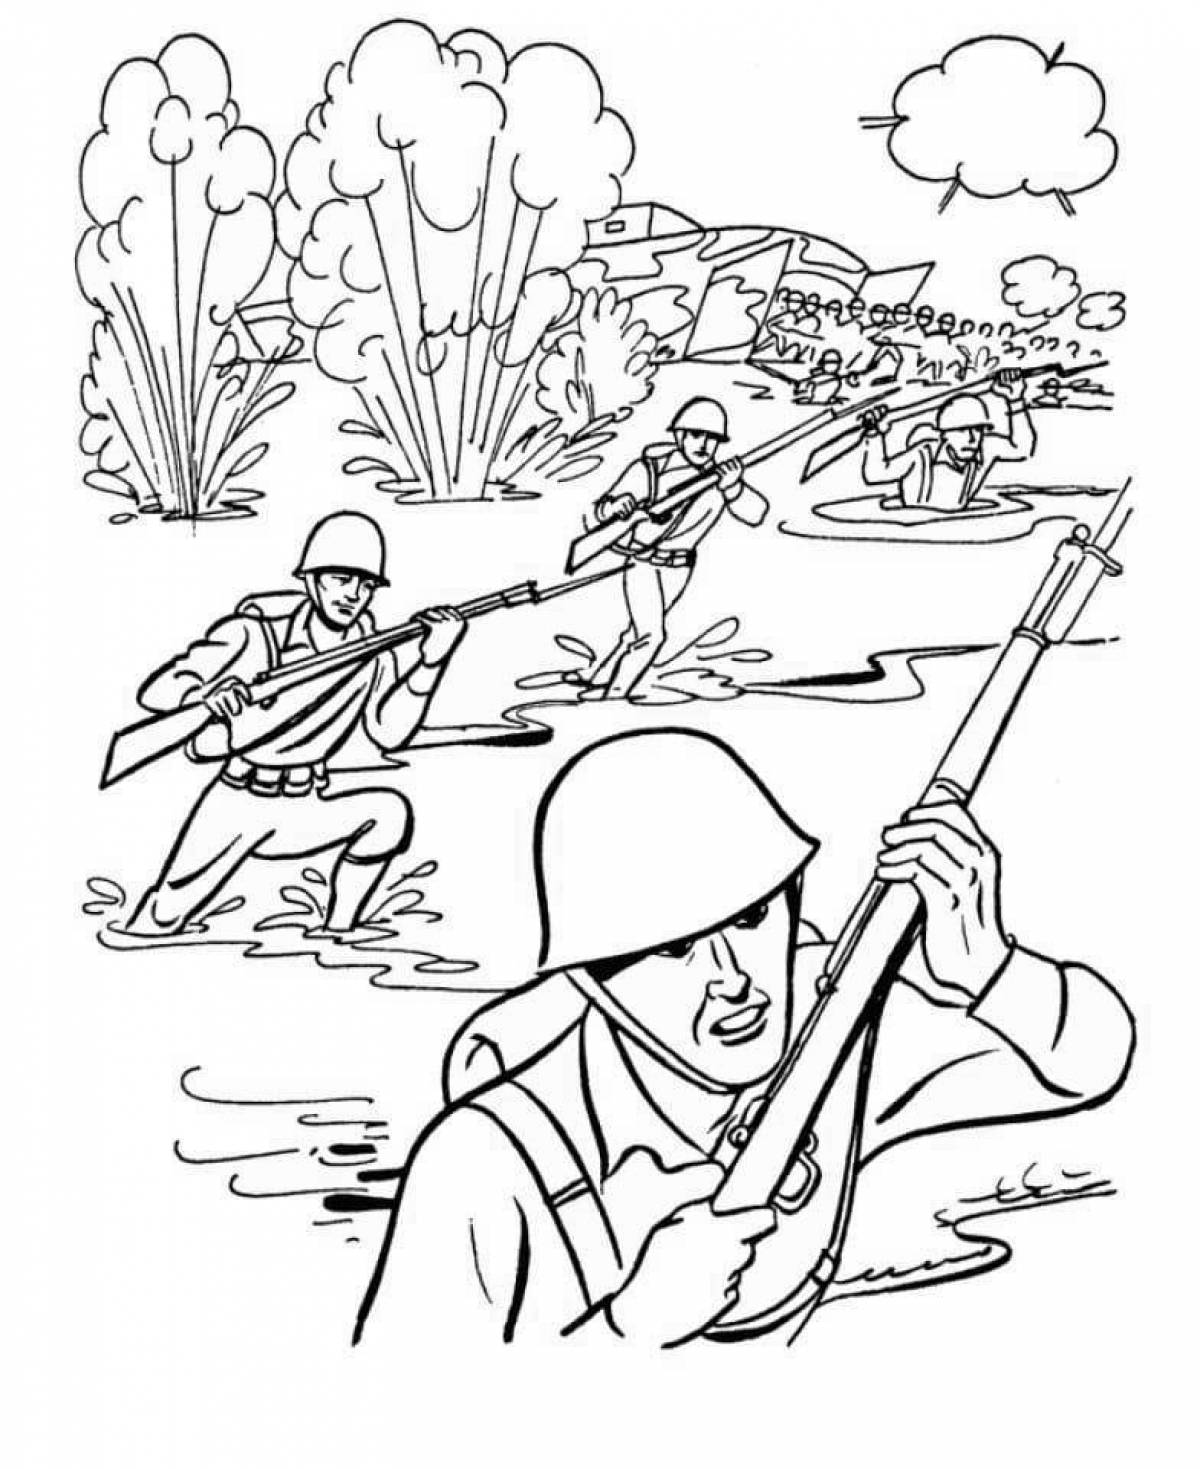 Exciting world war 2 coloring book